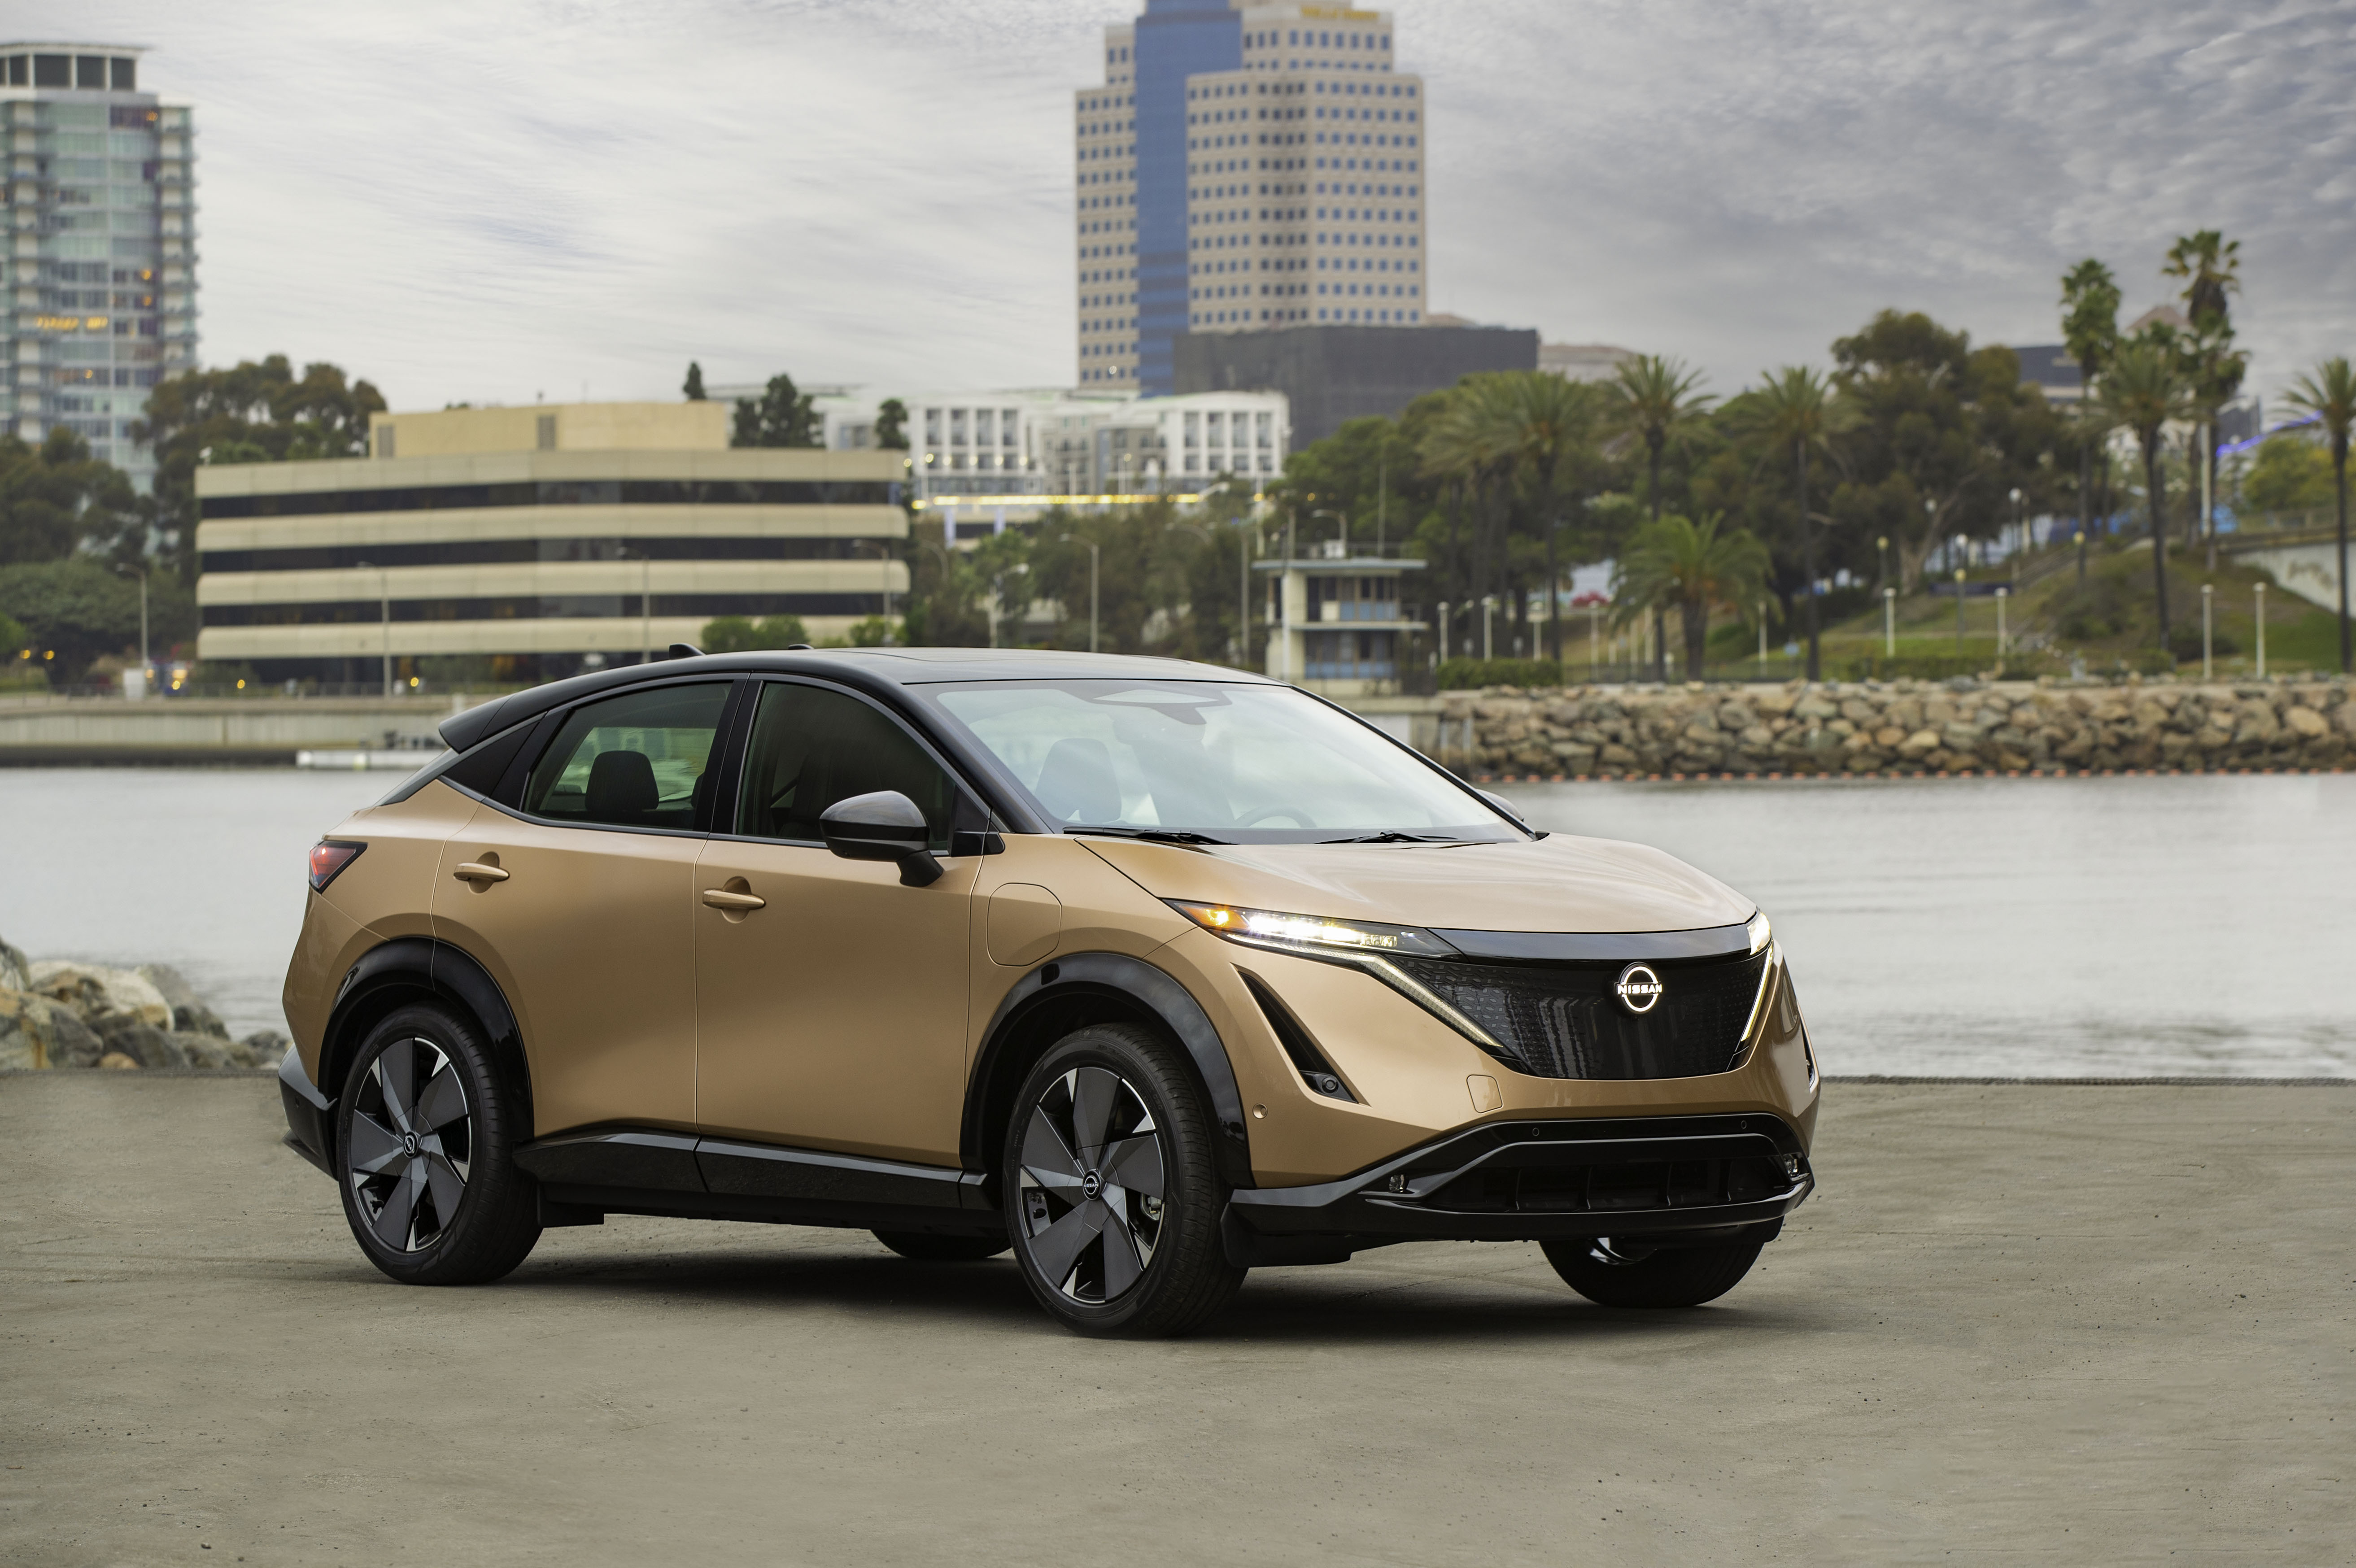 Nissan Showcases 2023 Ariya Electric Crossover, 2022 Rouge and 2023 Z at LA Auto Show